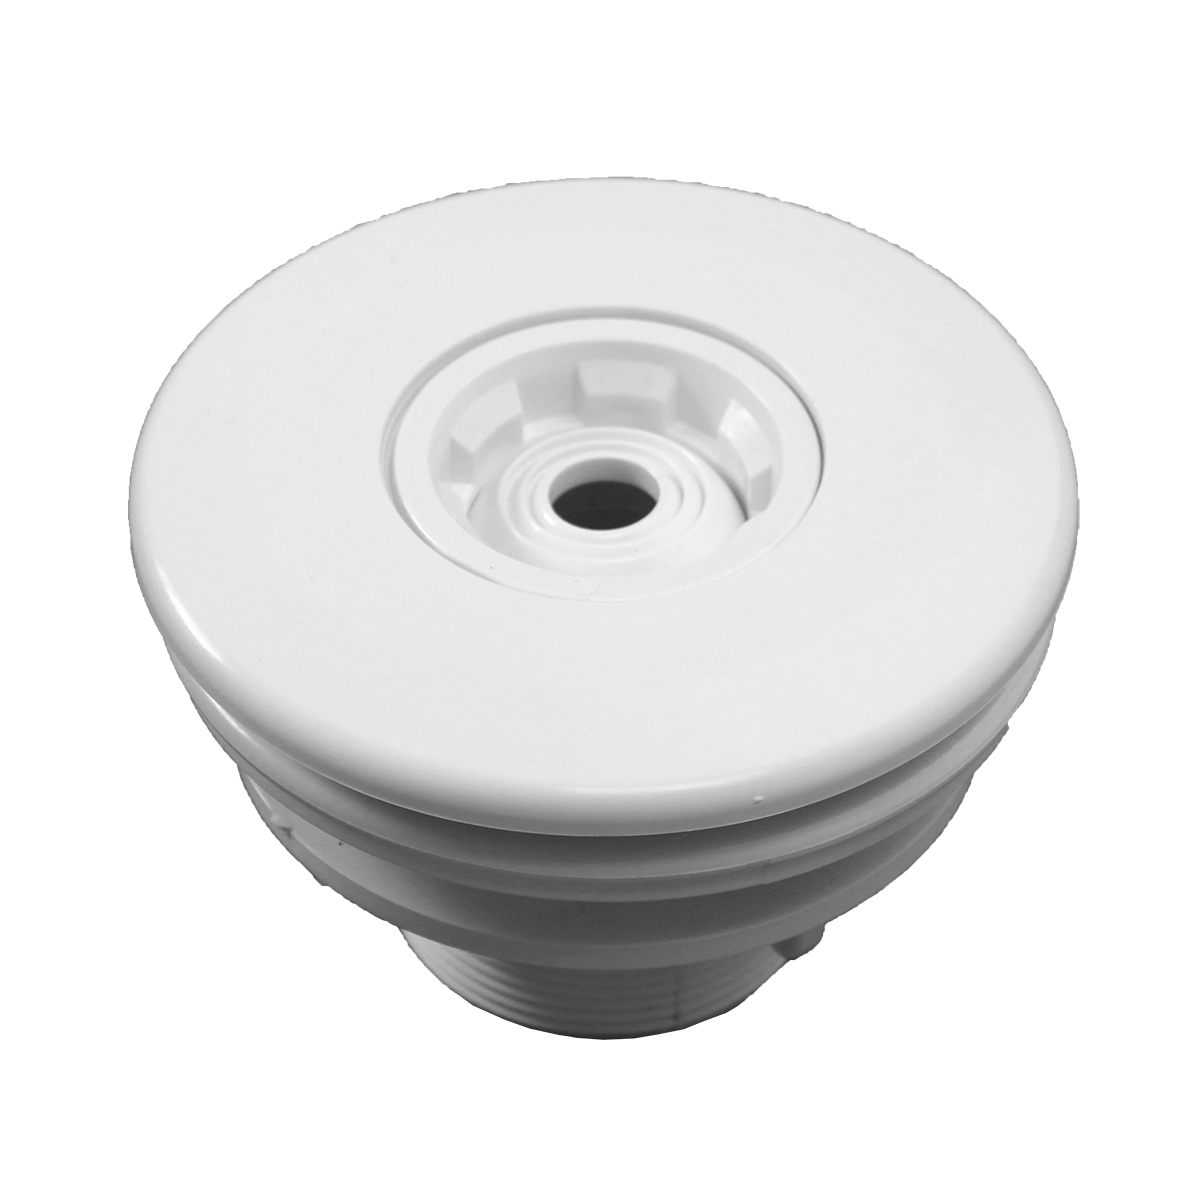 Smart inlet nozzle for polyester- and liner pools ABS, white, G2A external thread, d50 solvent internal Smart inlet nozzle for polyester- and liner pools ABS, white, G2A external thread, d50 solvent internal